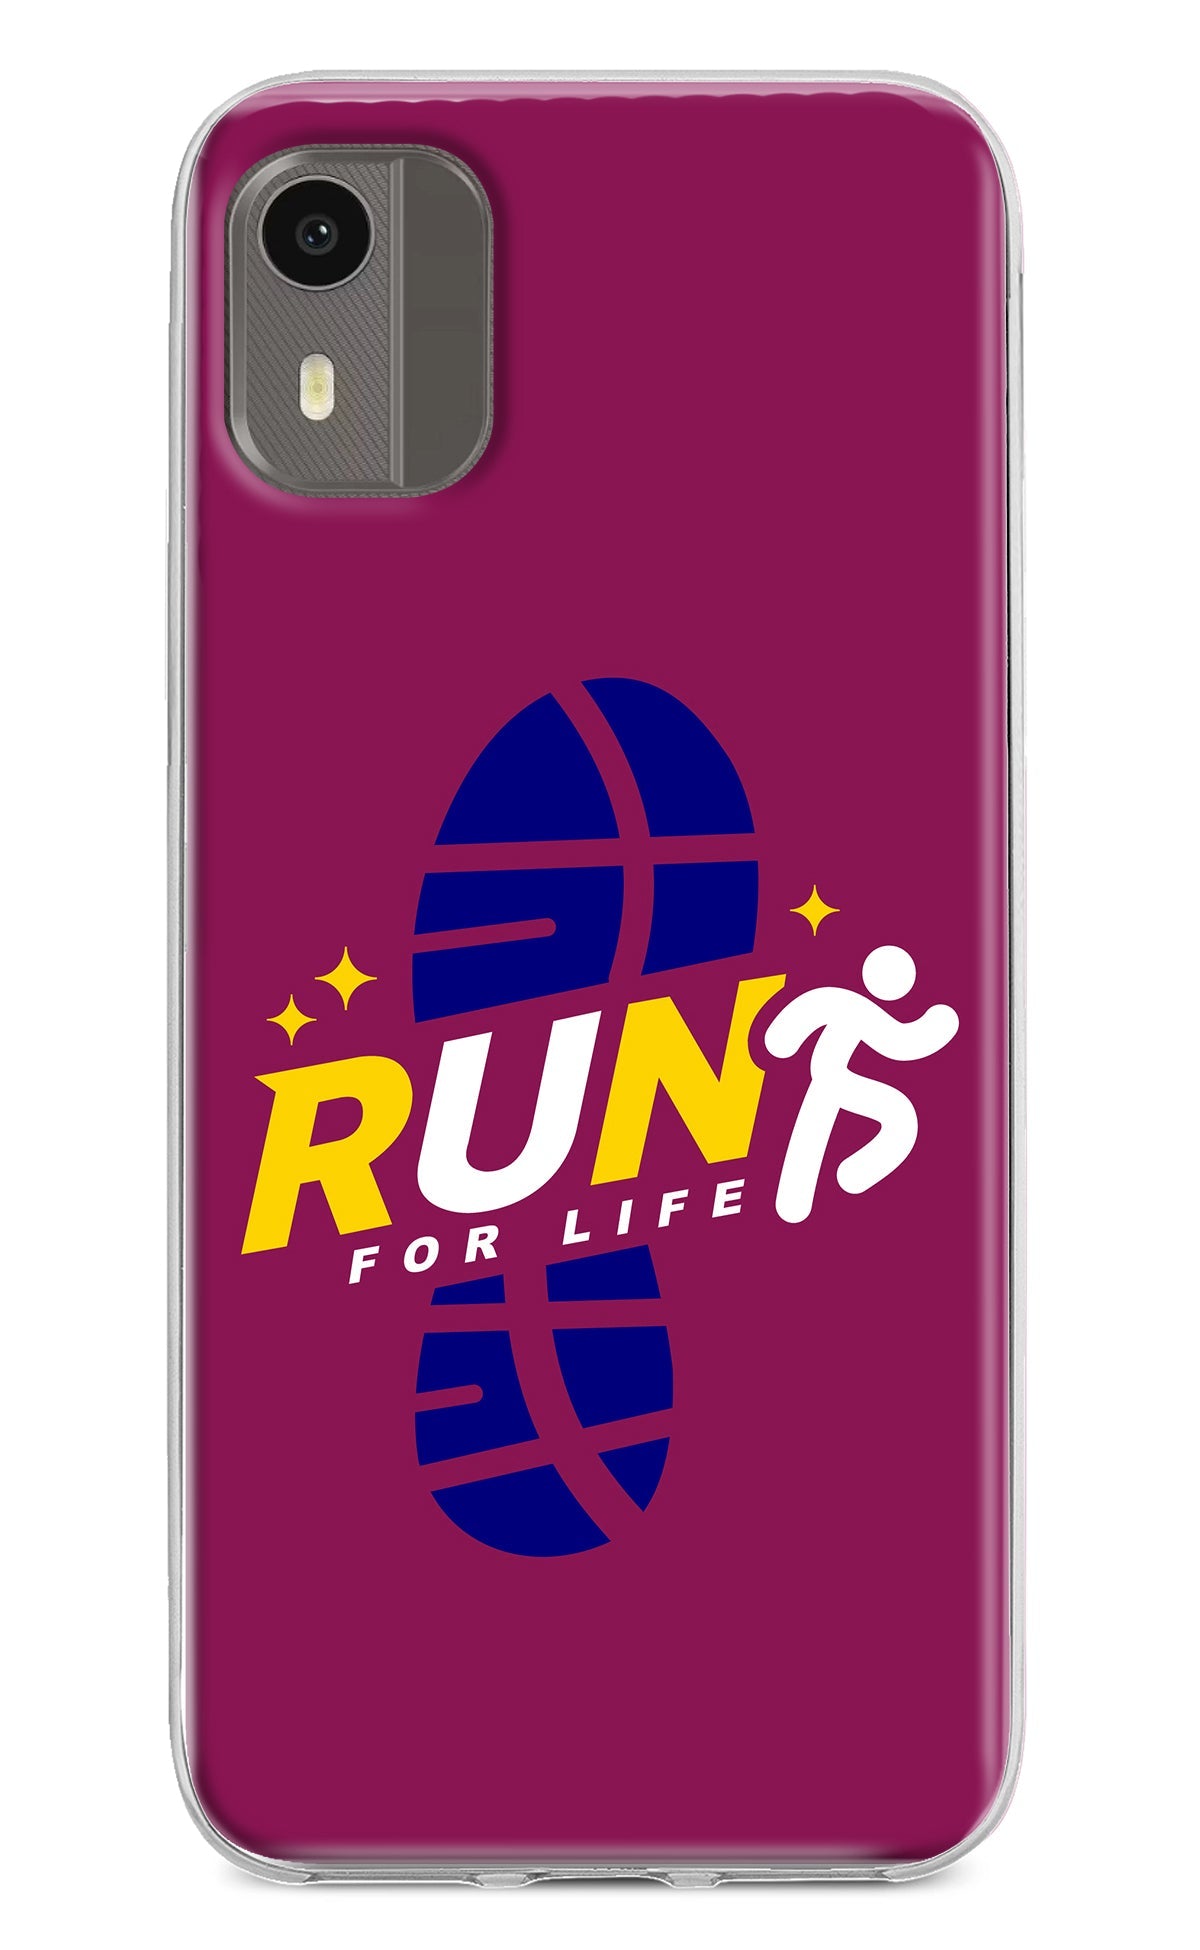 Run for Life Nokia C12/C12 Pro Back Cover